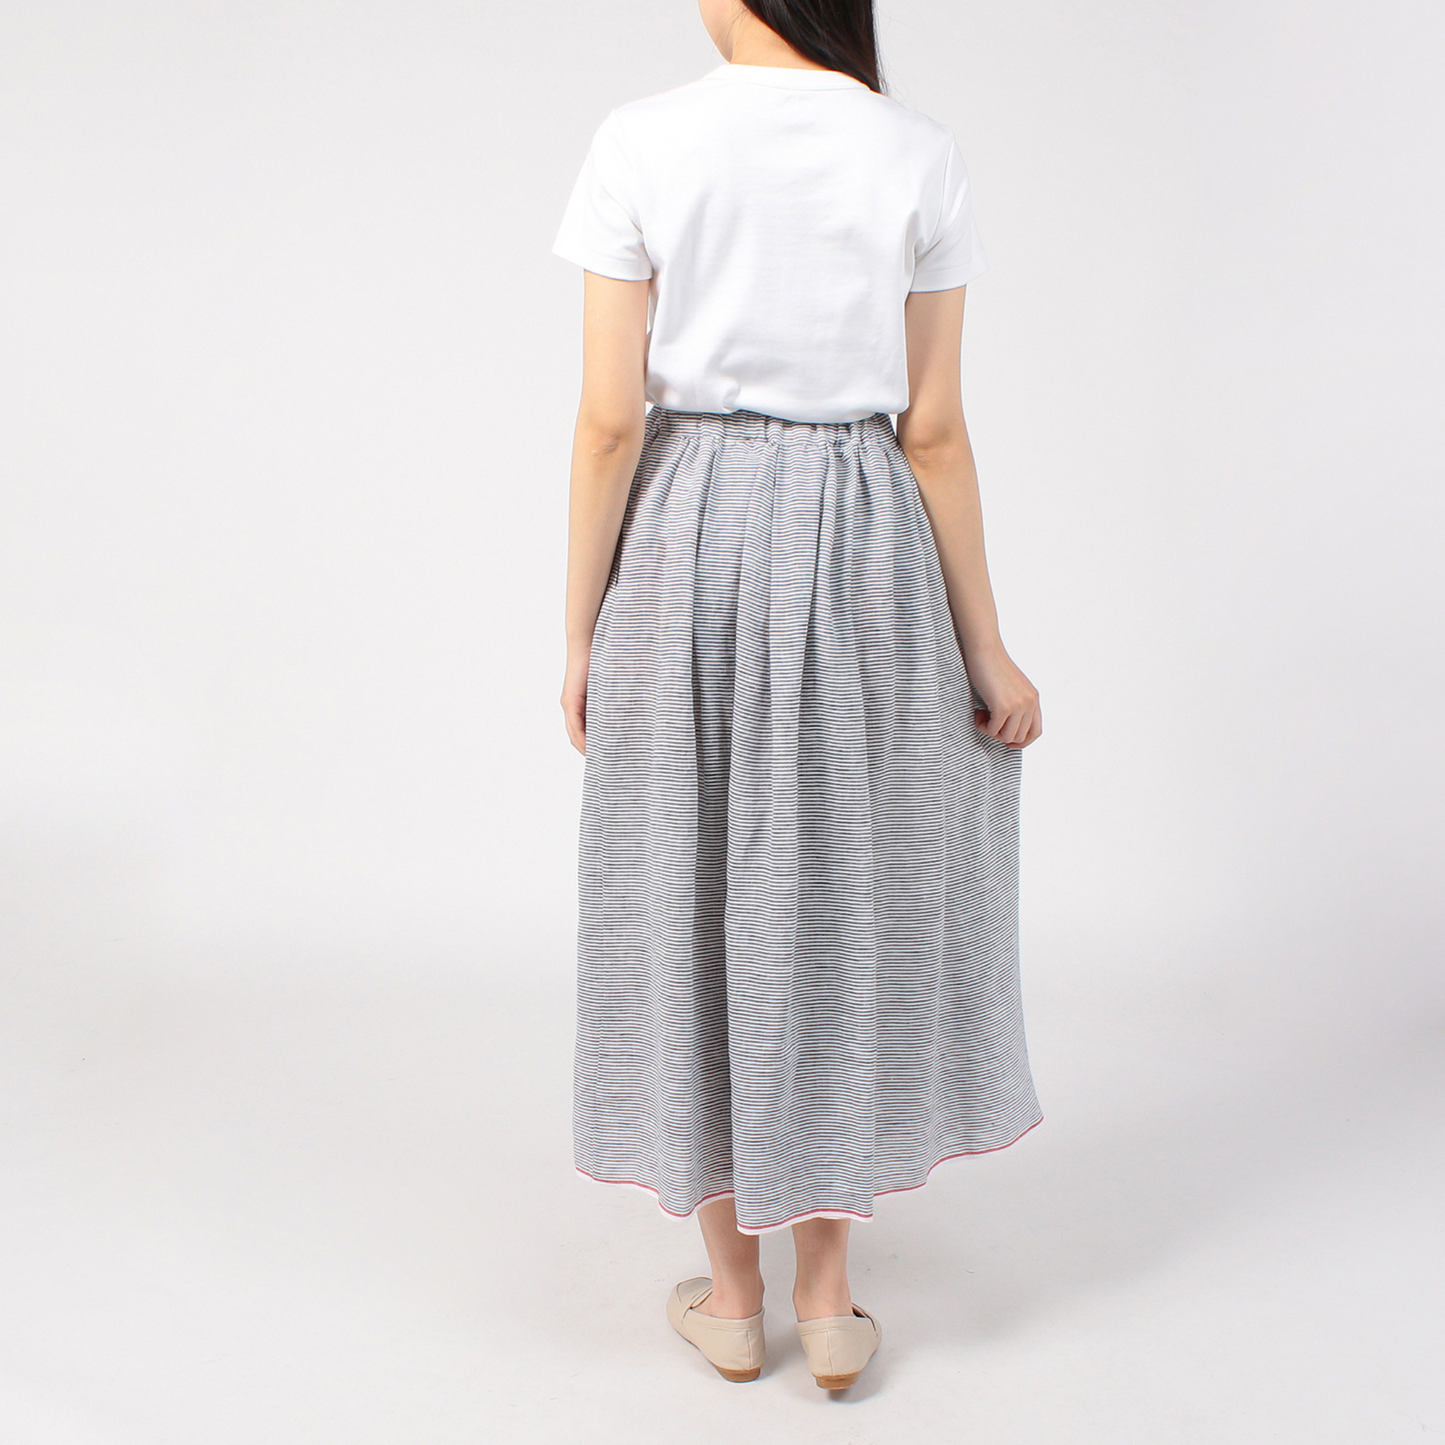 STAMP AND DIARY SELVEDGE LINEN GATHERED SKIRT